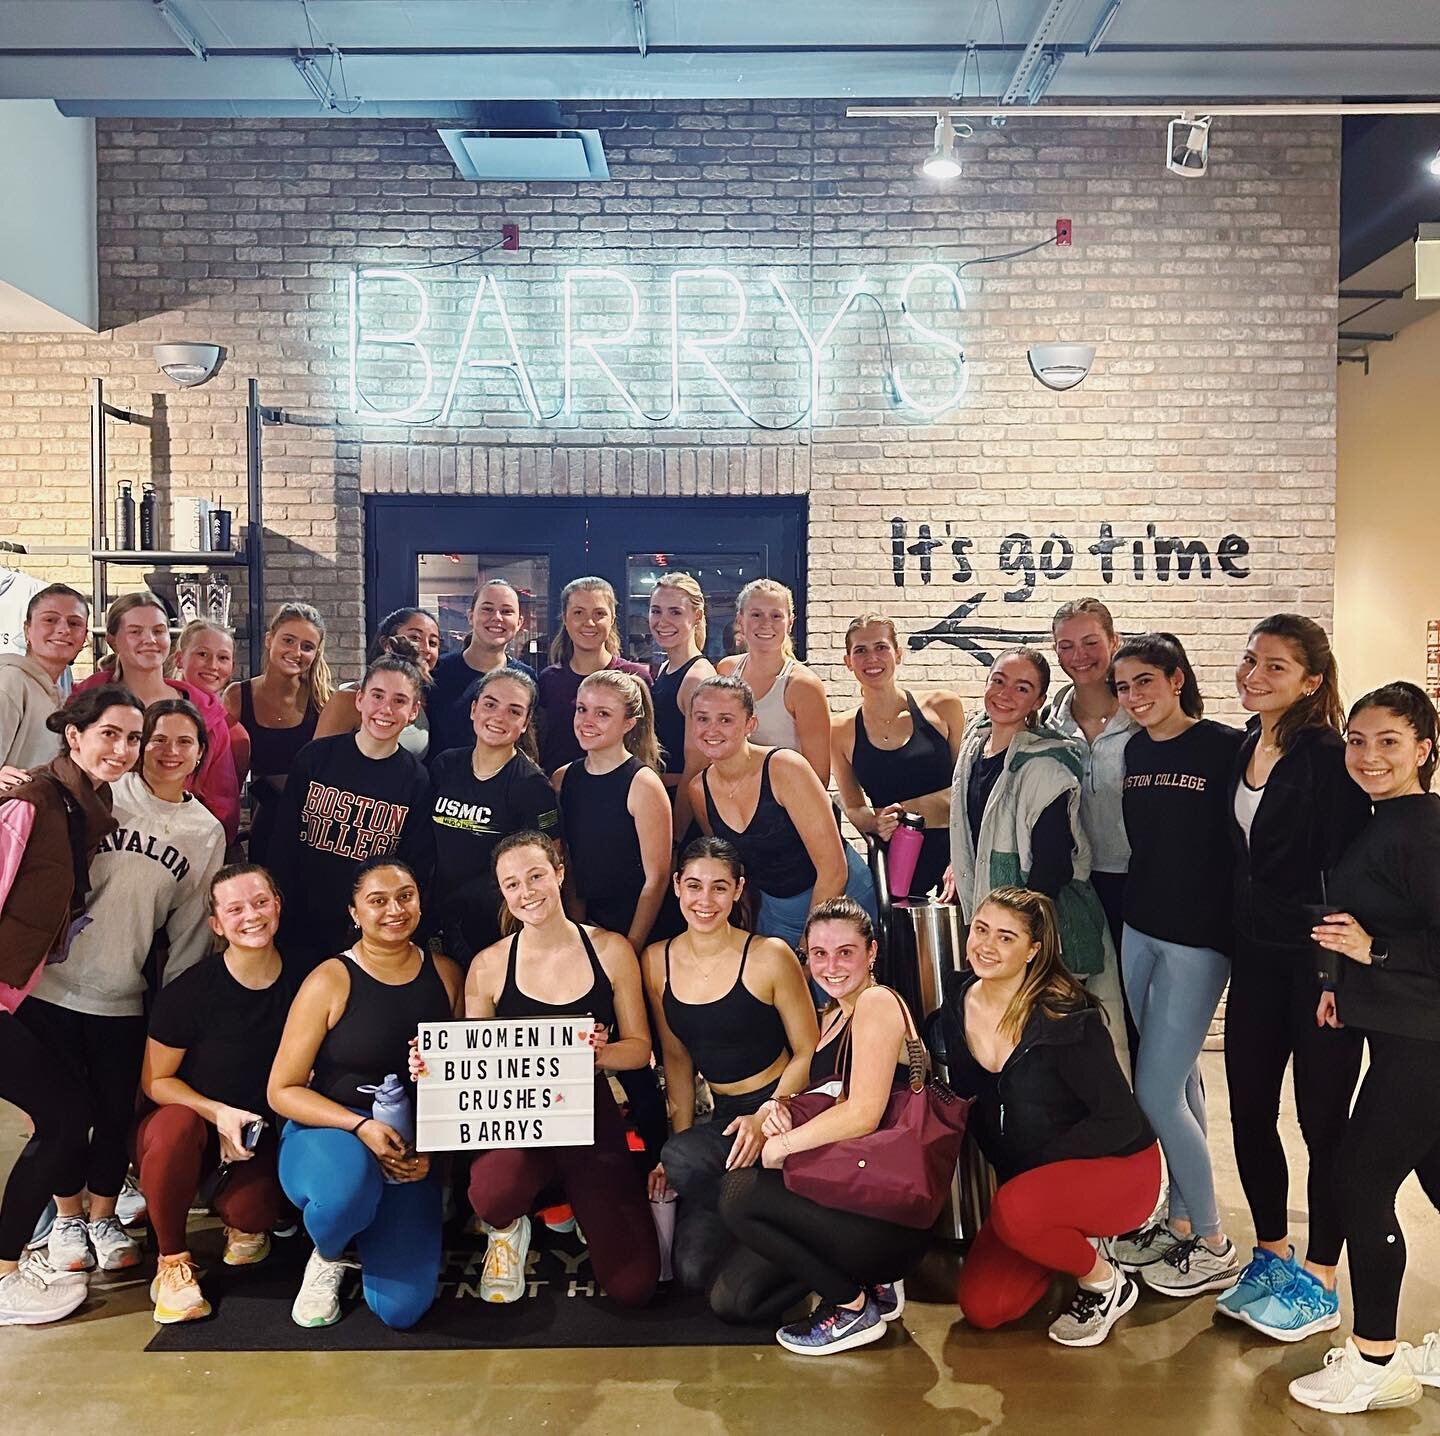 what the sign says➡️

Thank you @barrys for having us this week &amp; a huge thank you to everyone who came by🏃&zwj;♀️

#barrys #bcwib #bostoncollege #bc360